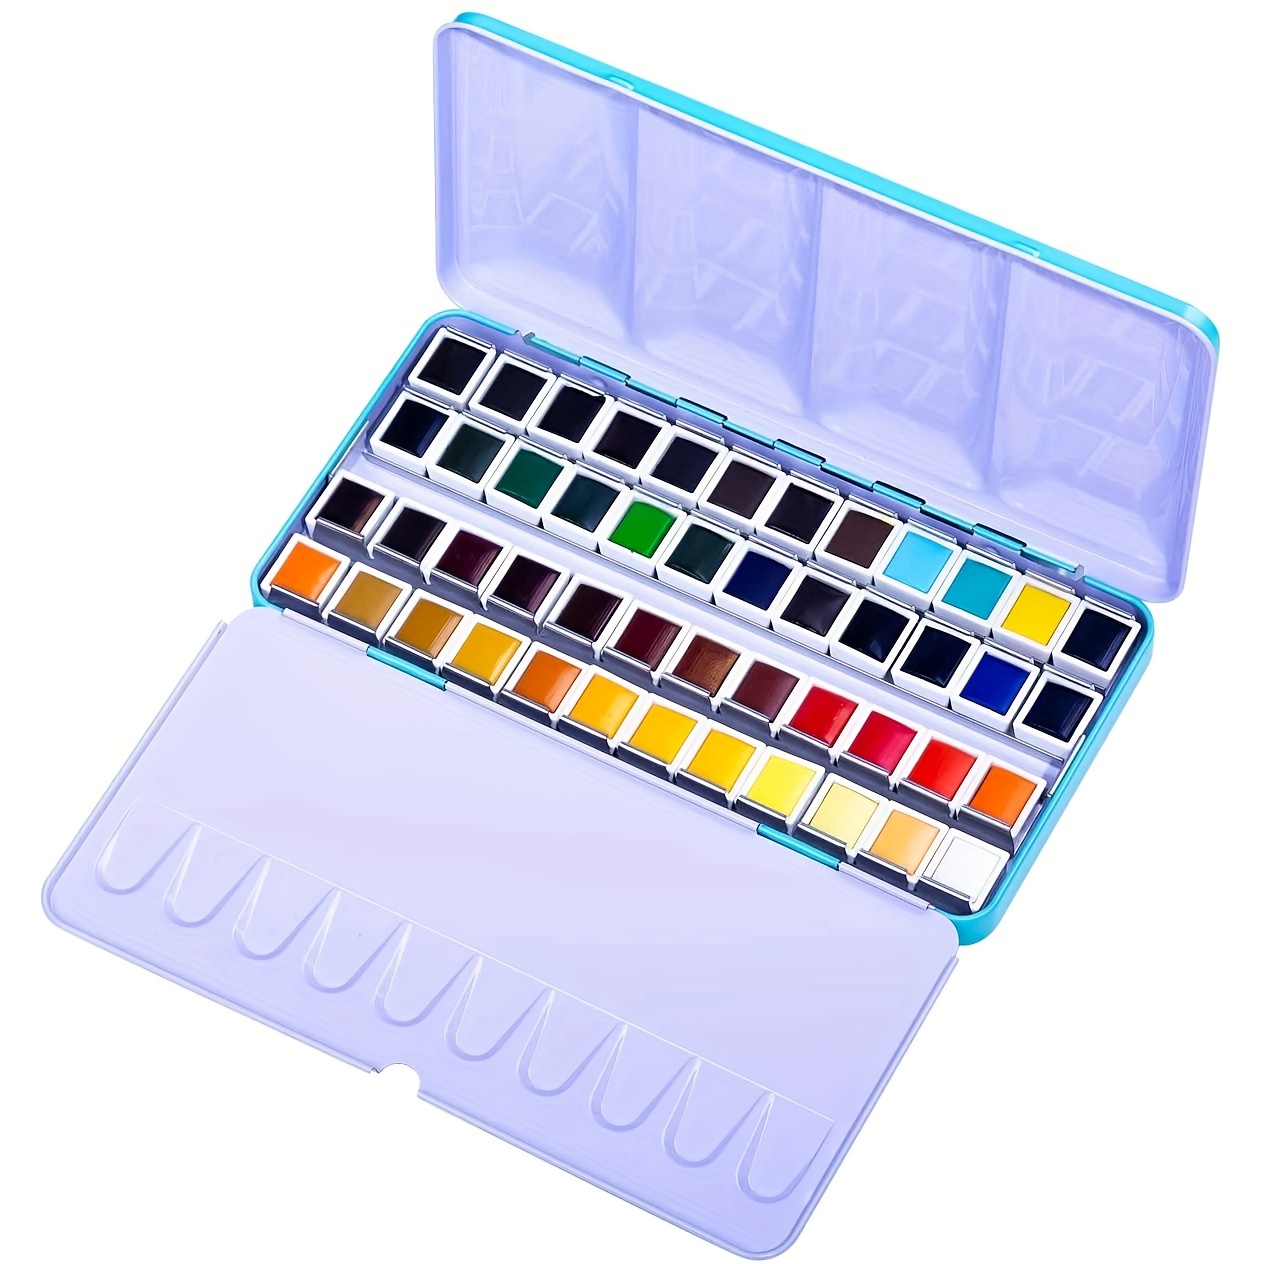 Paul Rubens Watercolor Paint, 36 Vibrant Colors Highly Pigmented, 5Ml Tubes